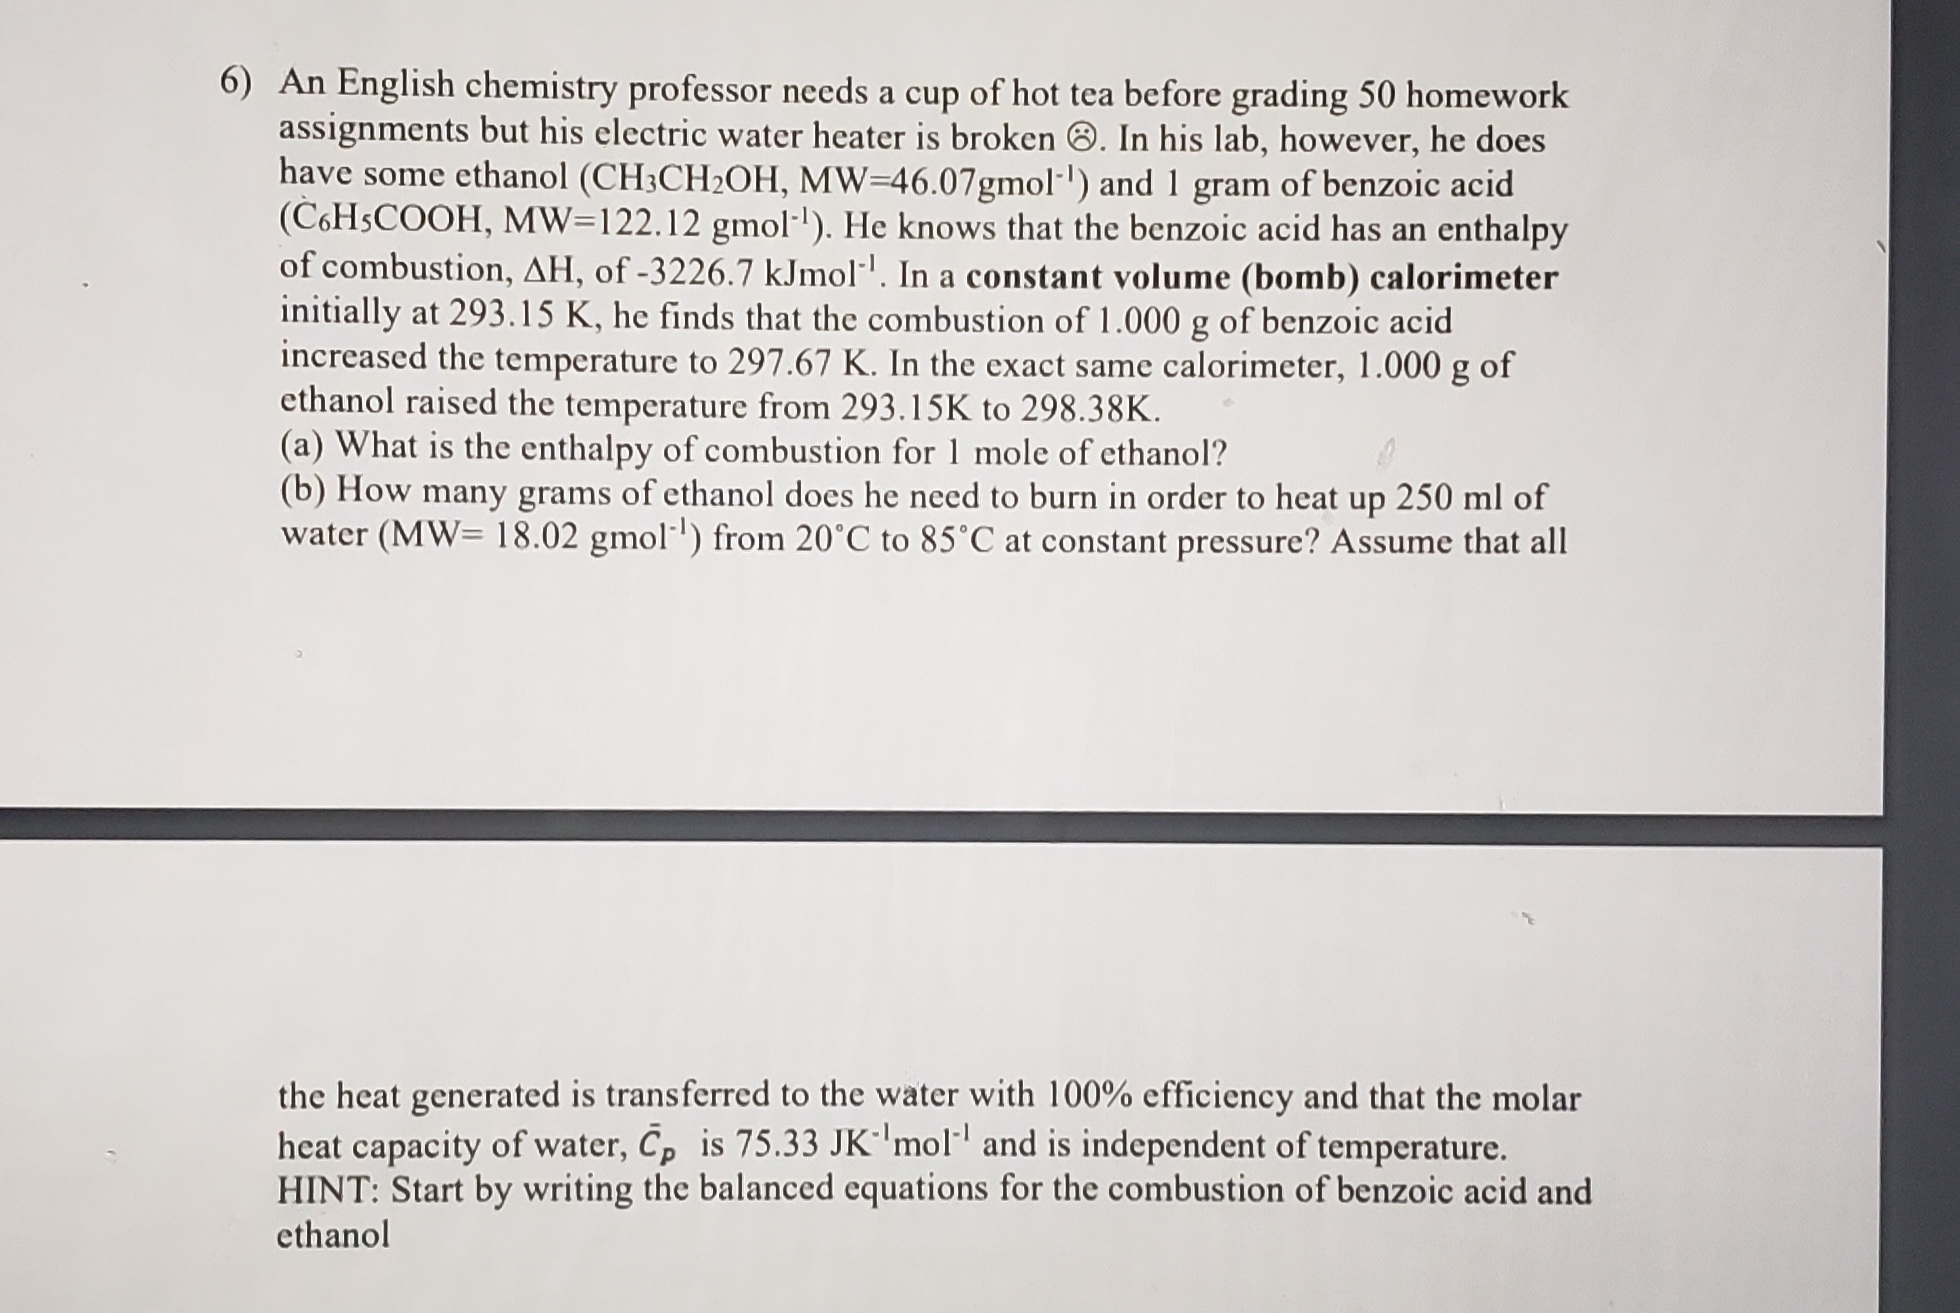 (b) How many grams of ethanol does he need to burn in order to heat up 250 ml of
water (MW= 18.02 gmol') from 20°C to 85°C at constant pressure? Assume that all
the heat generated is transferred to the water with 100% efficiency and that the molar
heat capacity of water, C, is 75.33 JK'mol and is independent of temperature.
